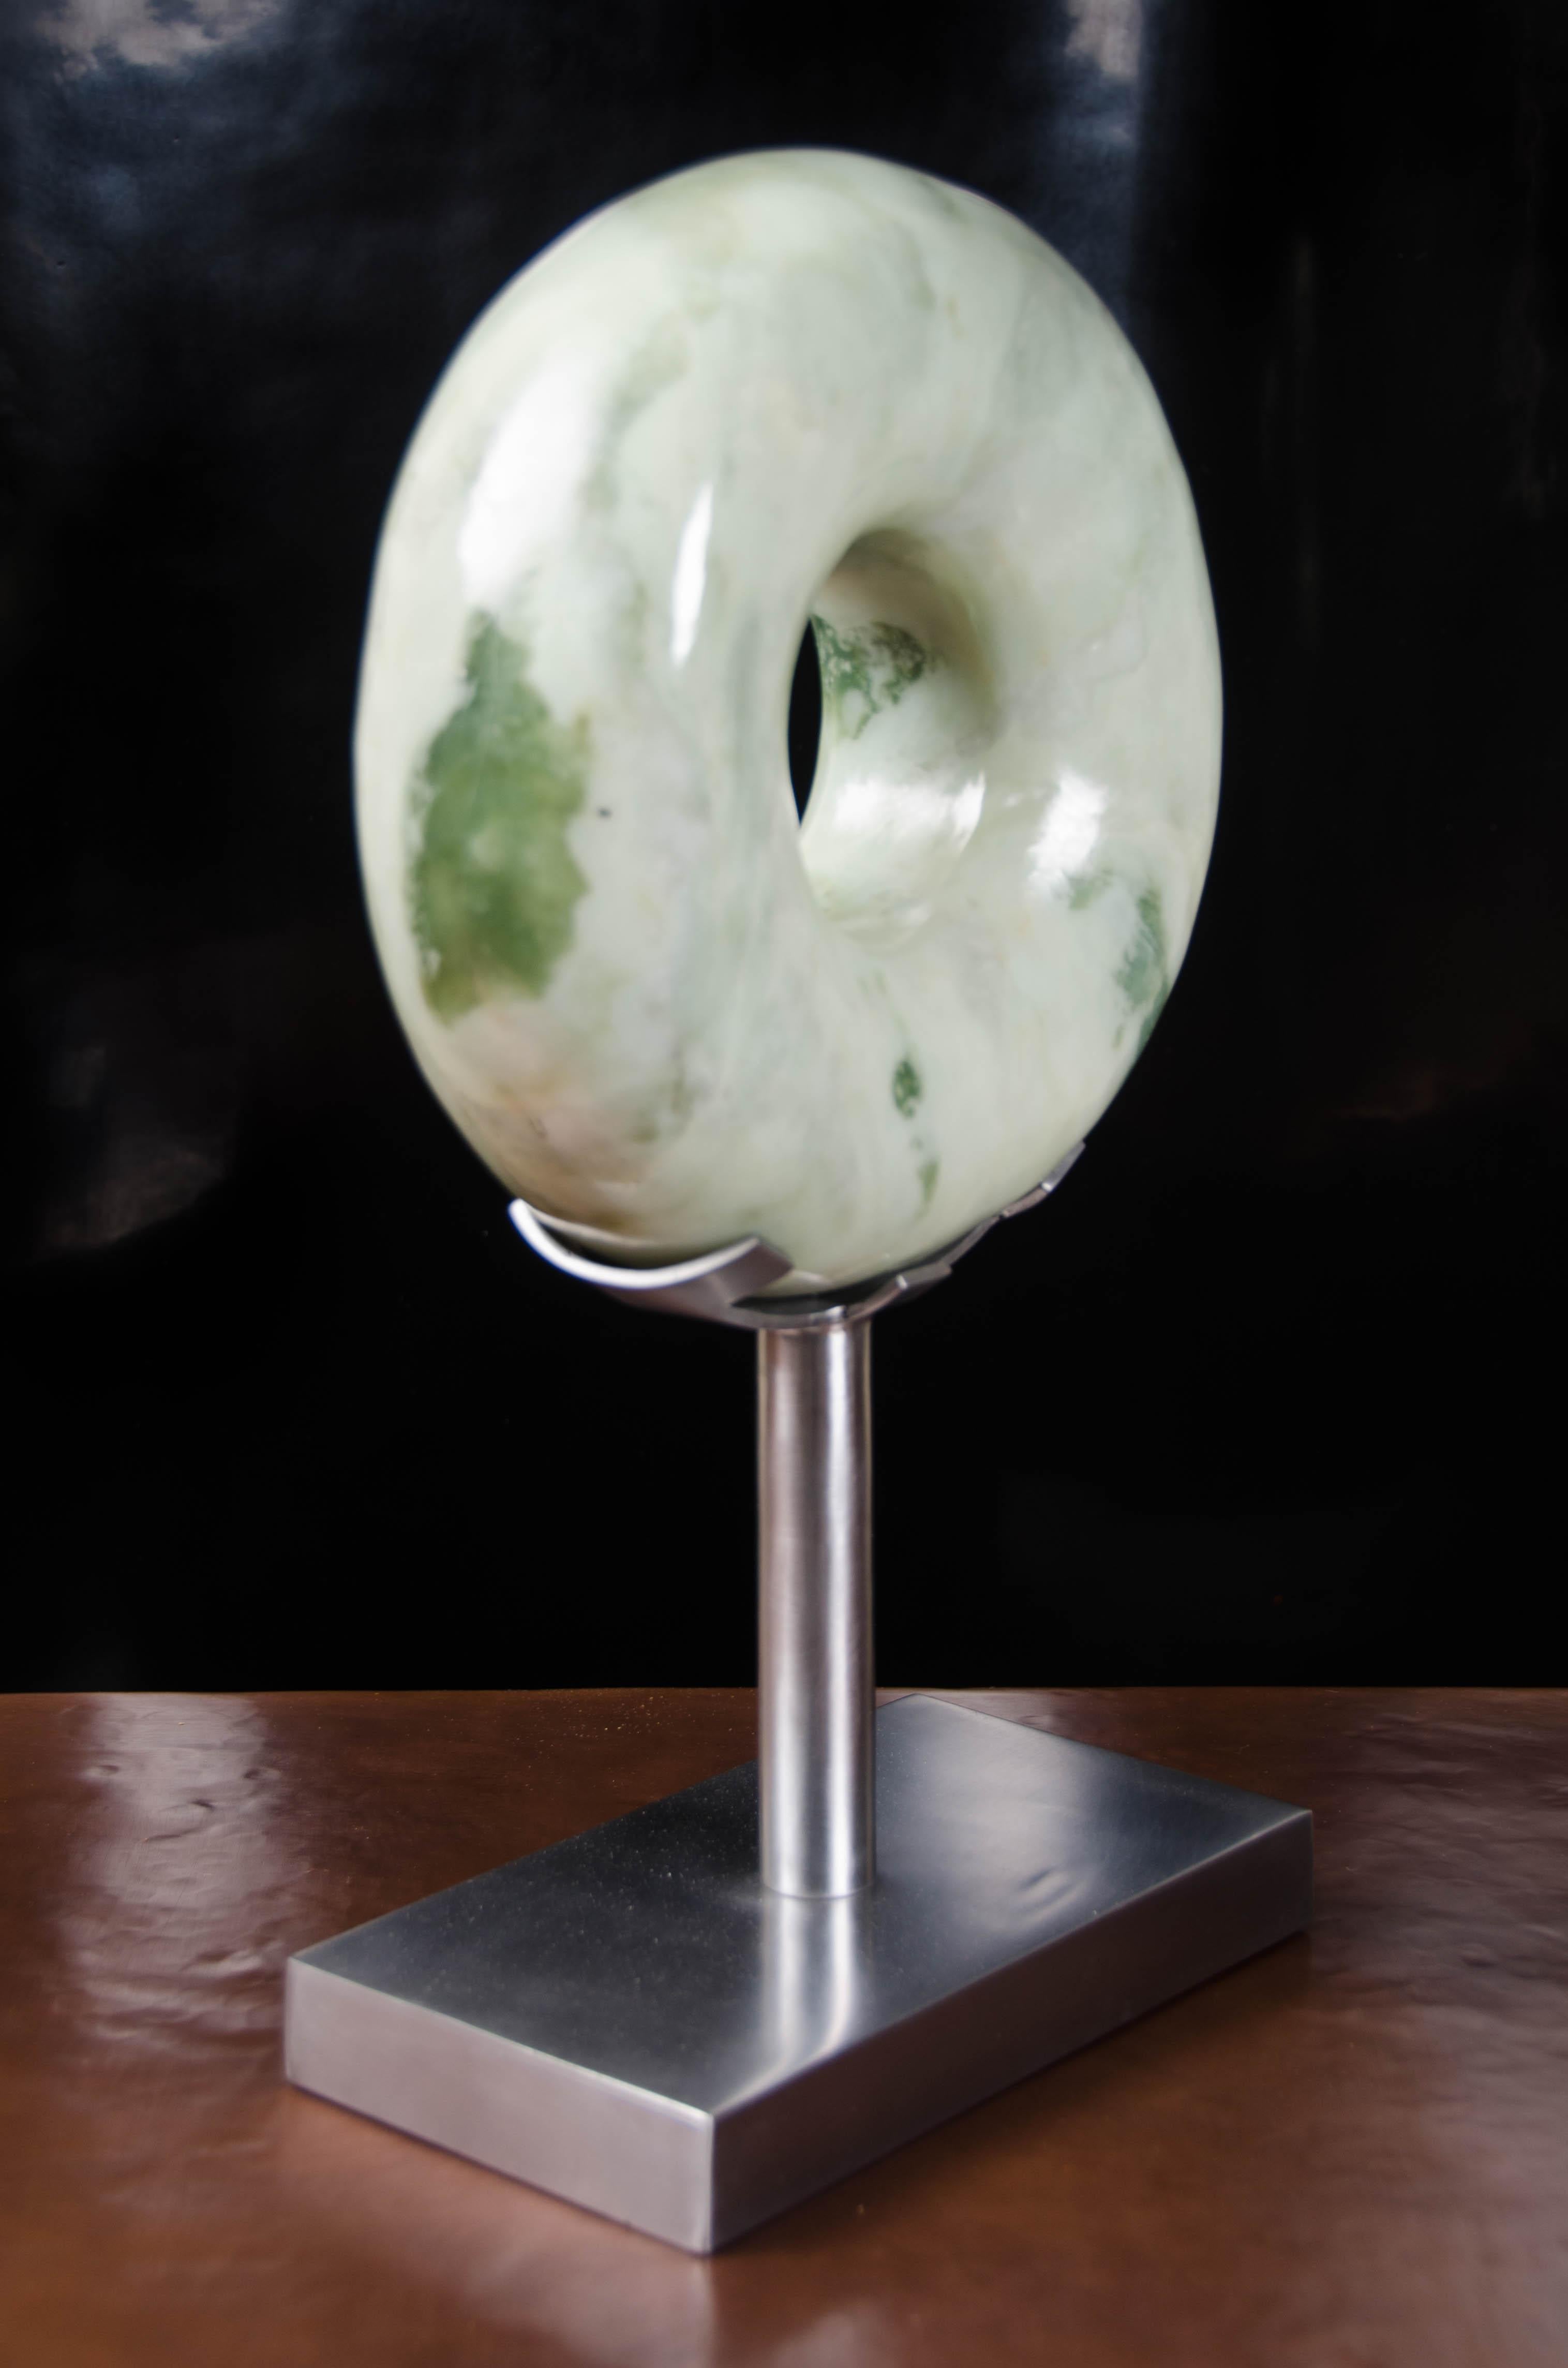 Rounded zong sculpture
Nephrite jade
Hand carved
Stainless steel
Hand repousse
Limited edition
Each individual jade vary in shapes and color

Known as the “Stone of Heaven,” Nephrite Jade is prized for both its aesthetic beauty and symbolic